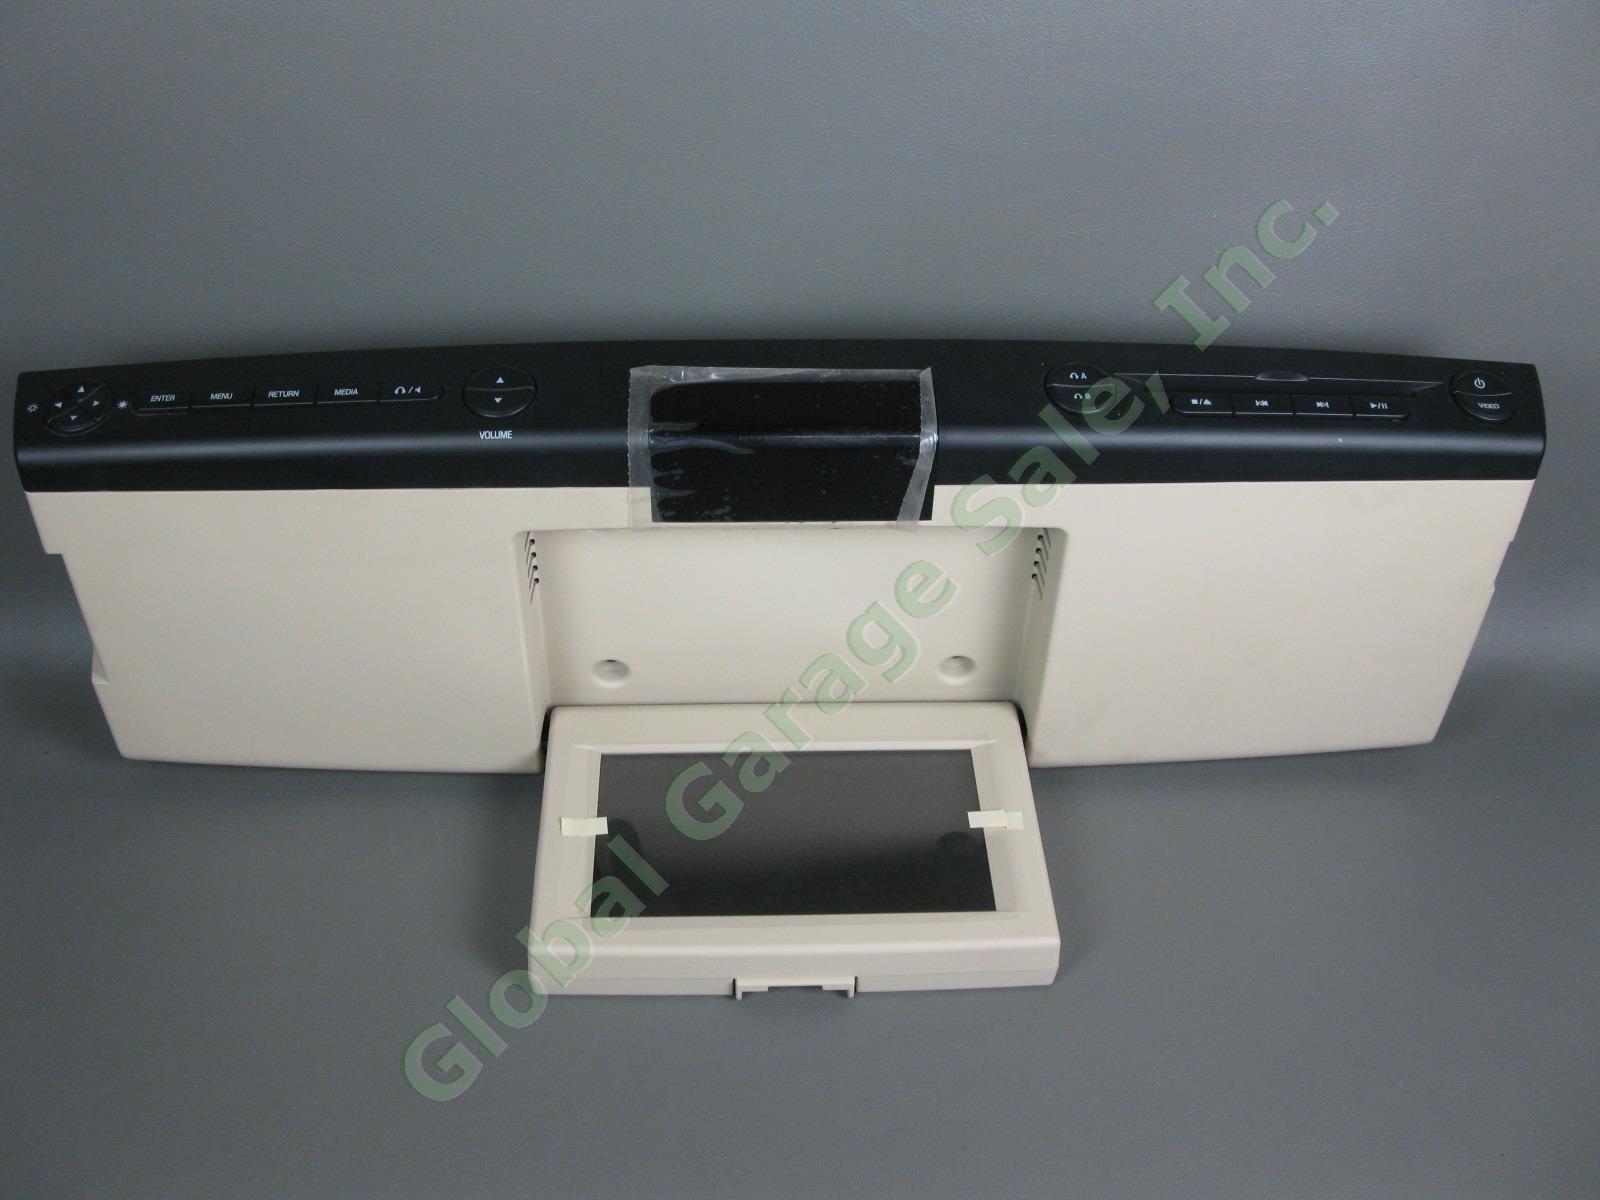 2008 Ford Expedition Overhead Rear Seat DVD Player Display 8L2T-10E947-CA34T0 NR